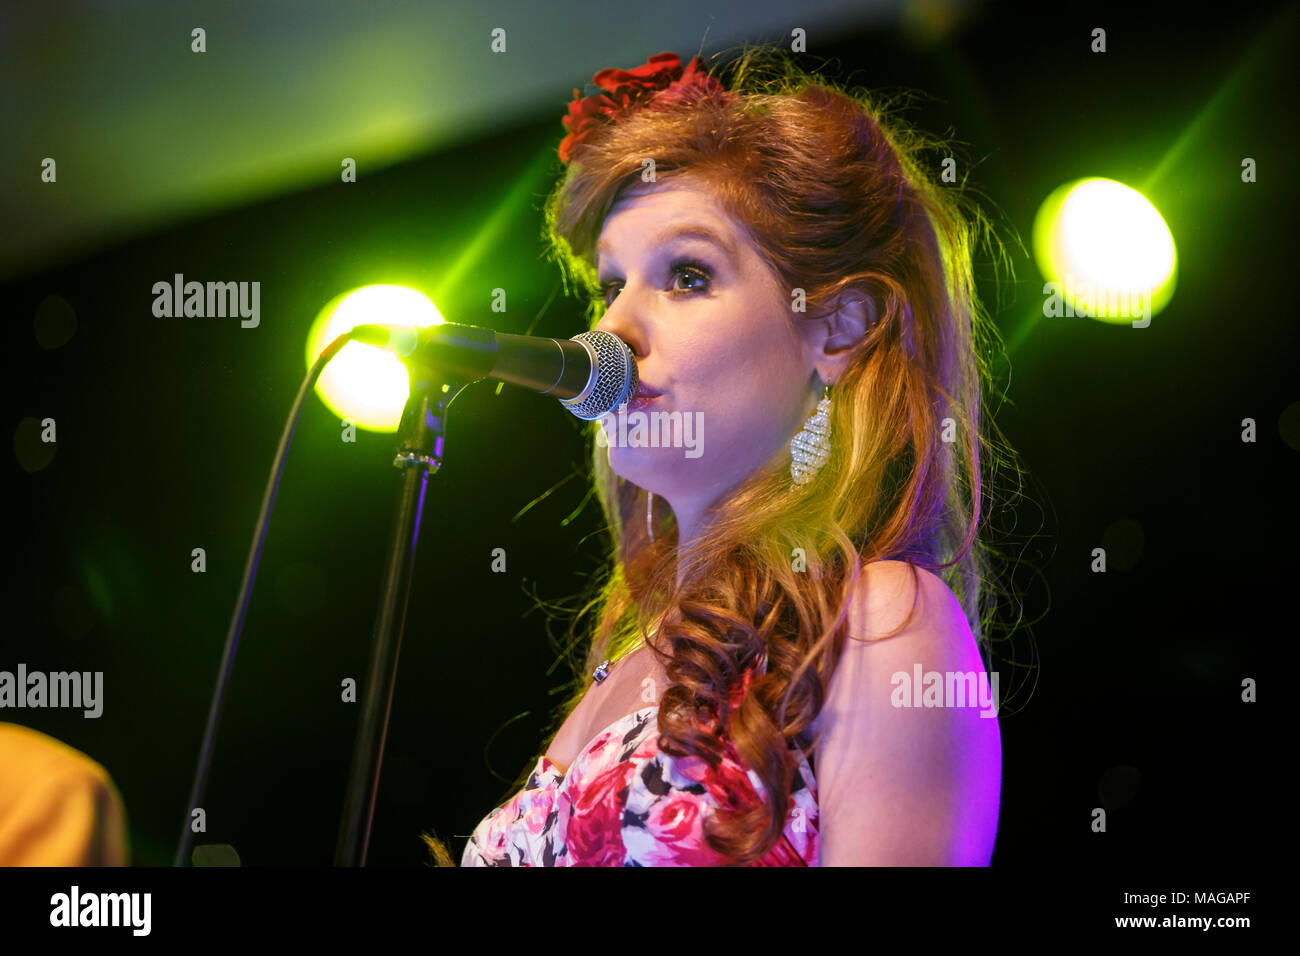 Nantwich, Cheshire, UK. 1st April, 2018.Cassidy Janson joins The Jive Aces during their performance at the Nantwich Civic Hall during the 22nd Nantwich Jazz, Blues and Music Festival. Credit: Simon Newbury/Alamy Live News Stock Photo